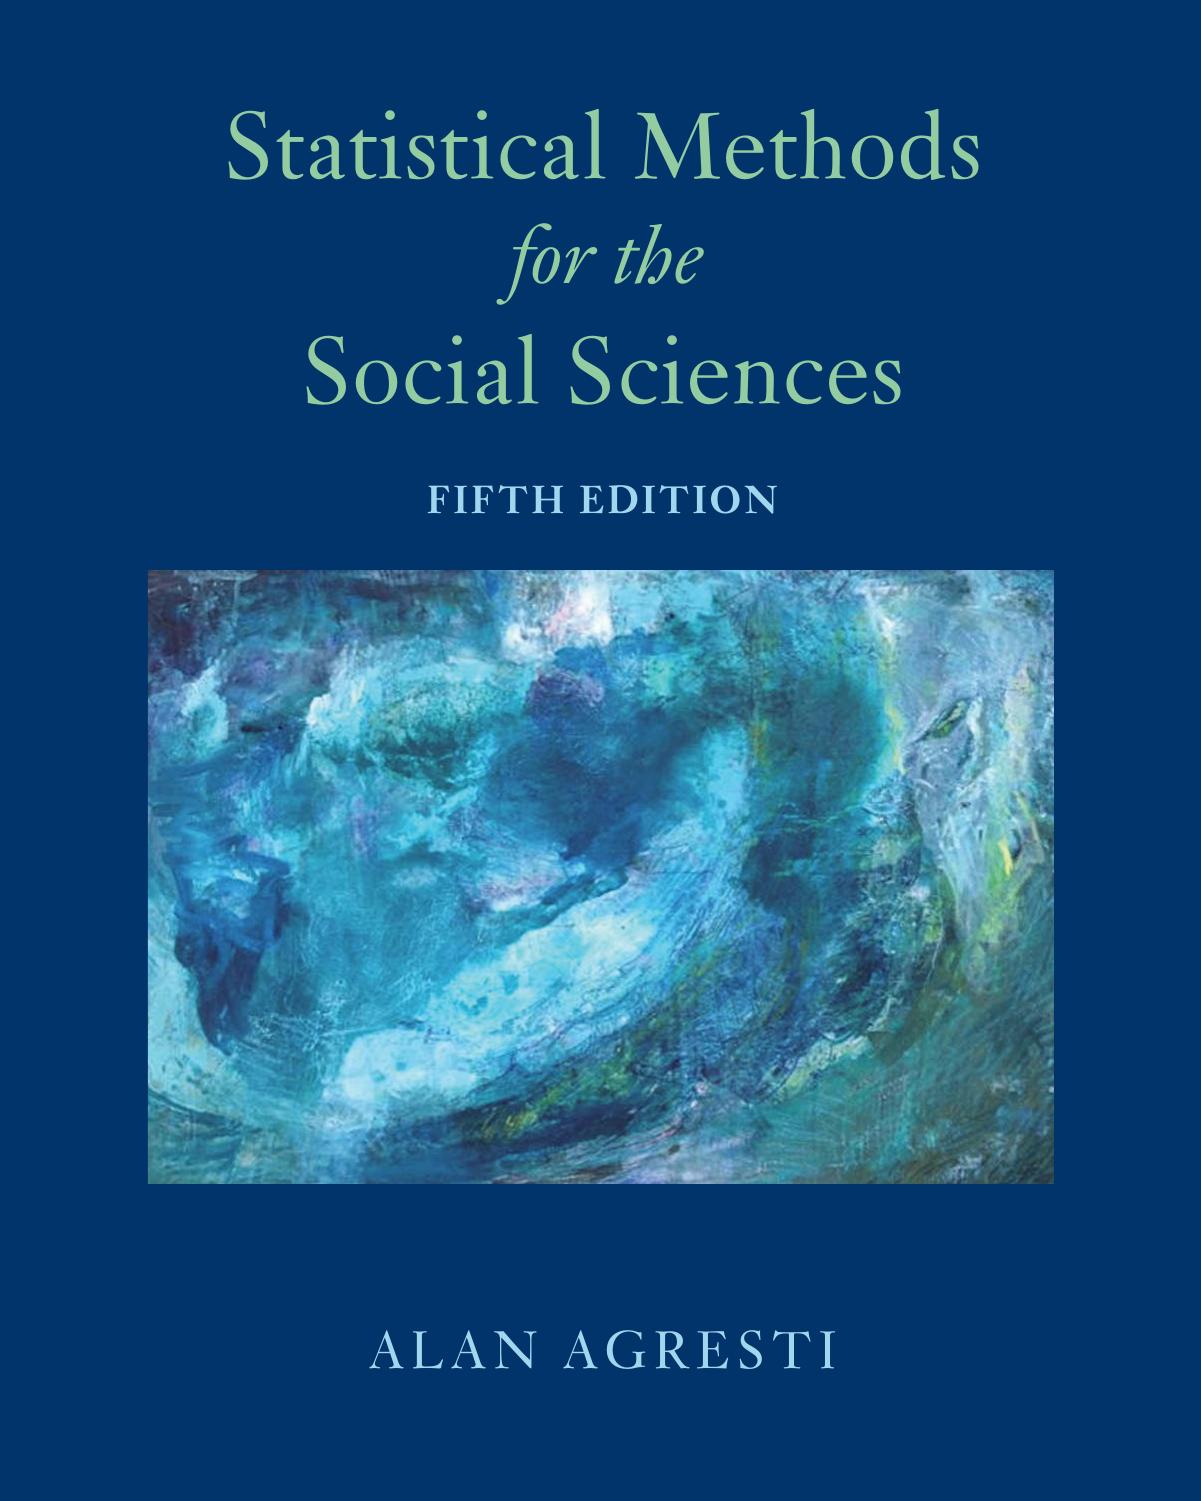 Statistical Methods for the Social Sciences Fifth Edition